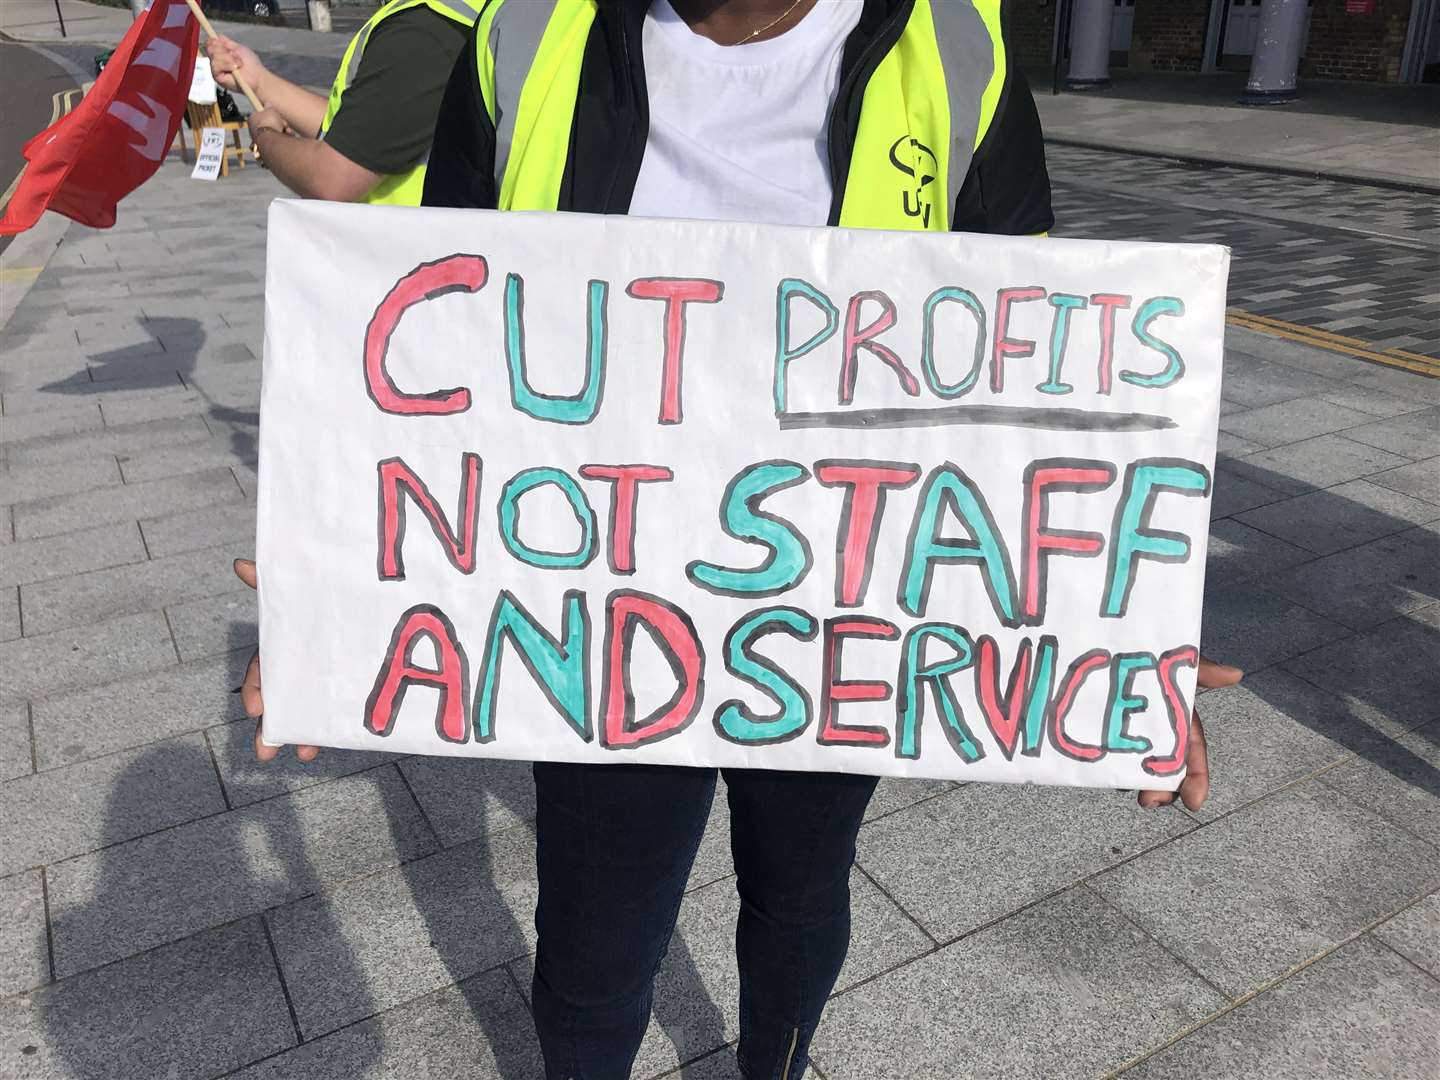 The RMT and Aslef members are striking again in February